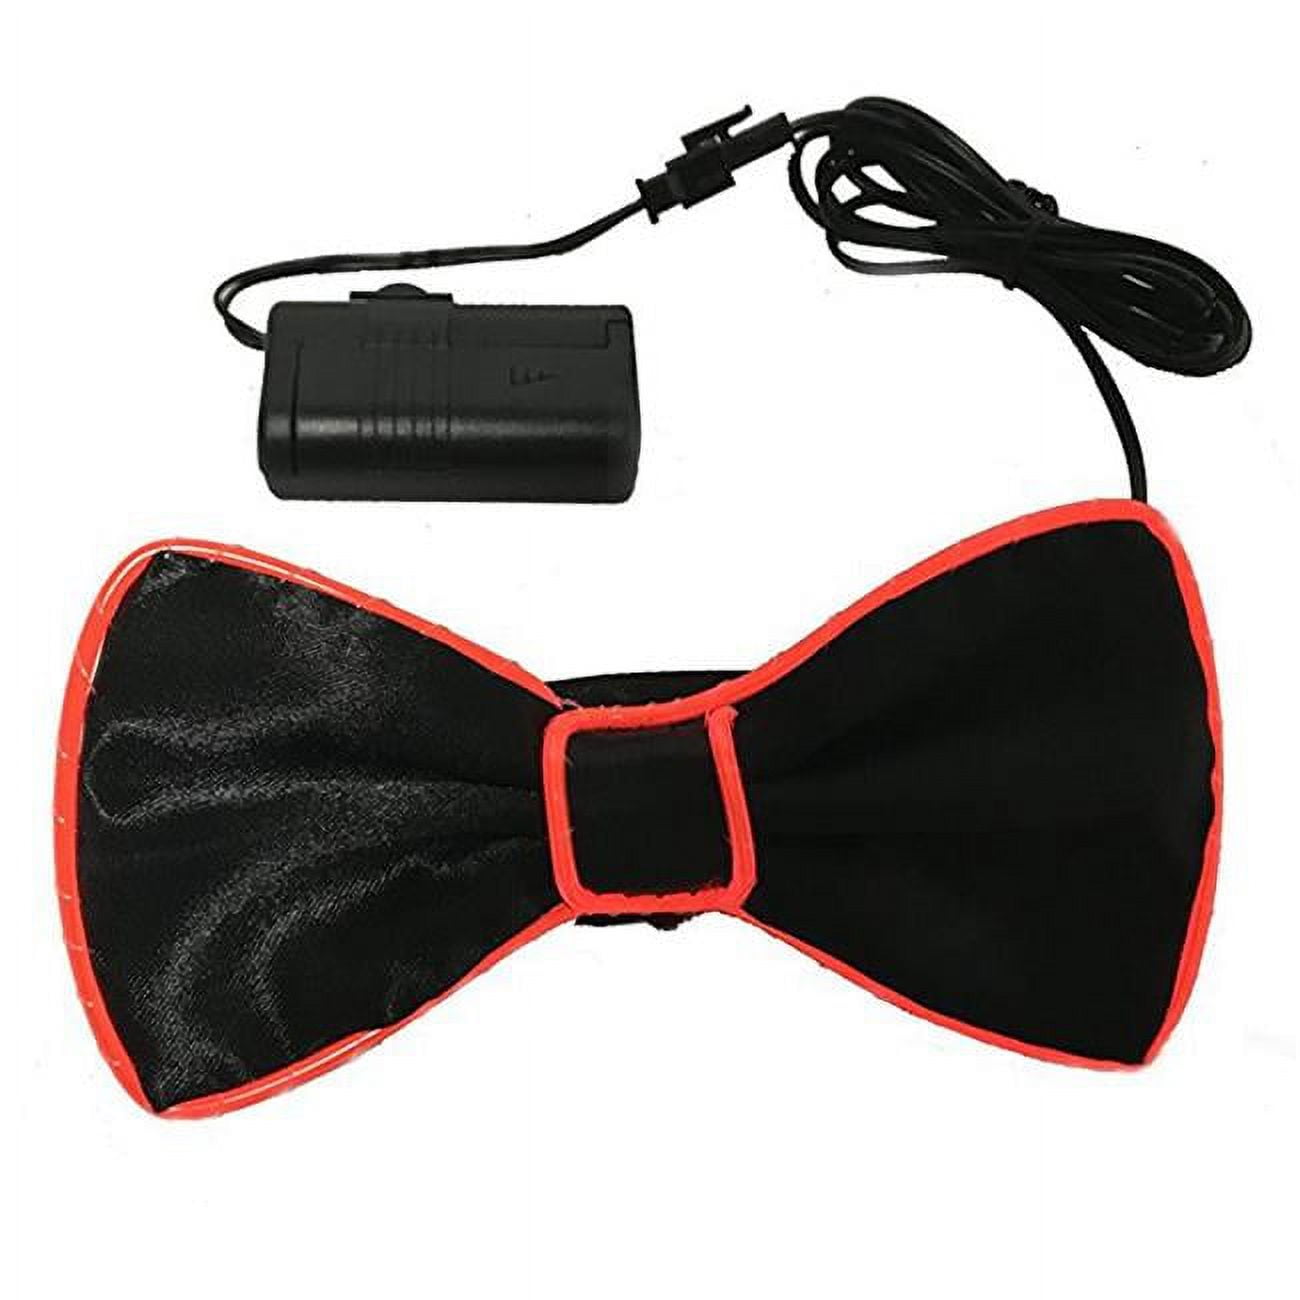 Picture of Blinkee EL-REDbowtie Flashing EL Wire Red Bow Tie for Men Night Rave Parties